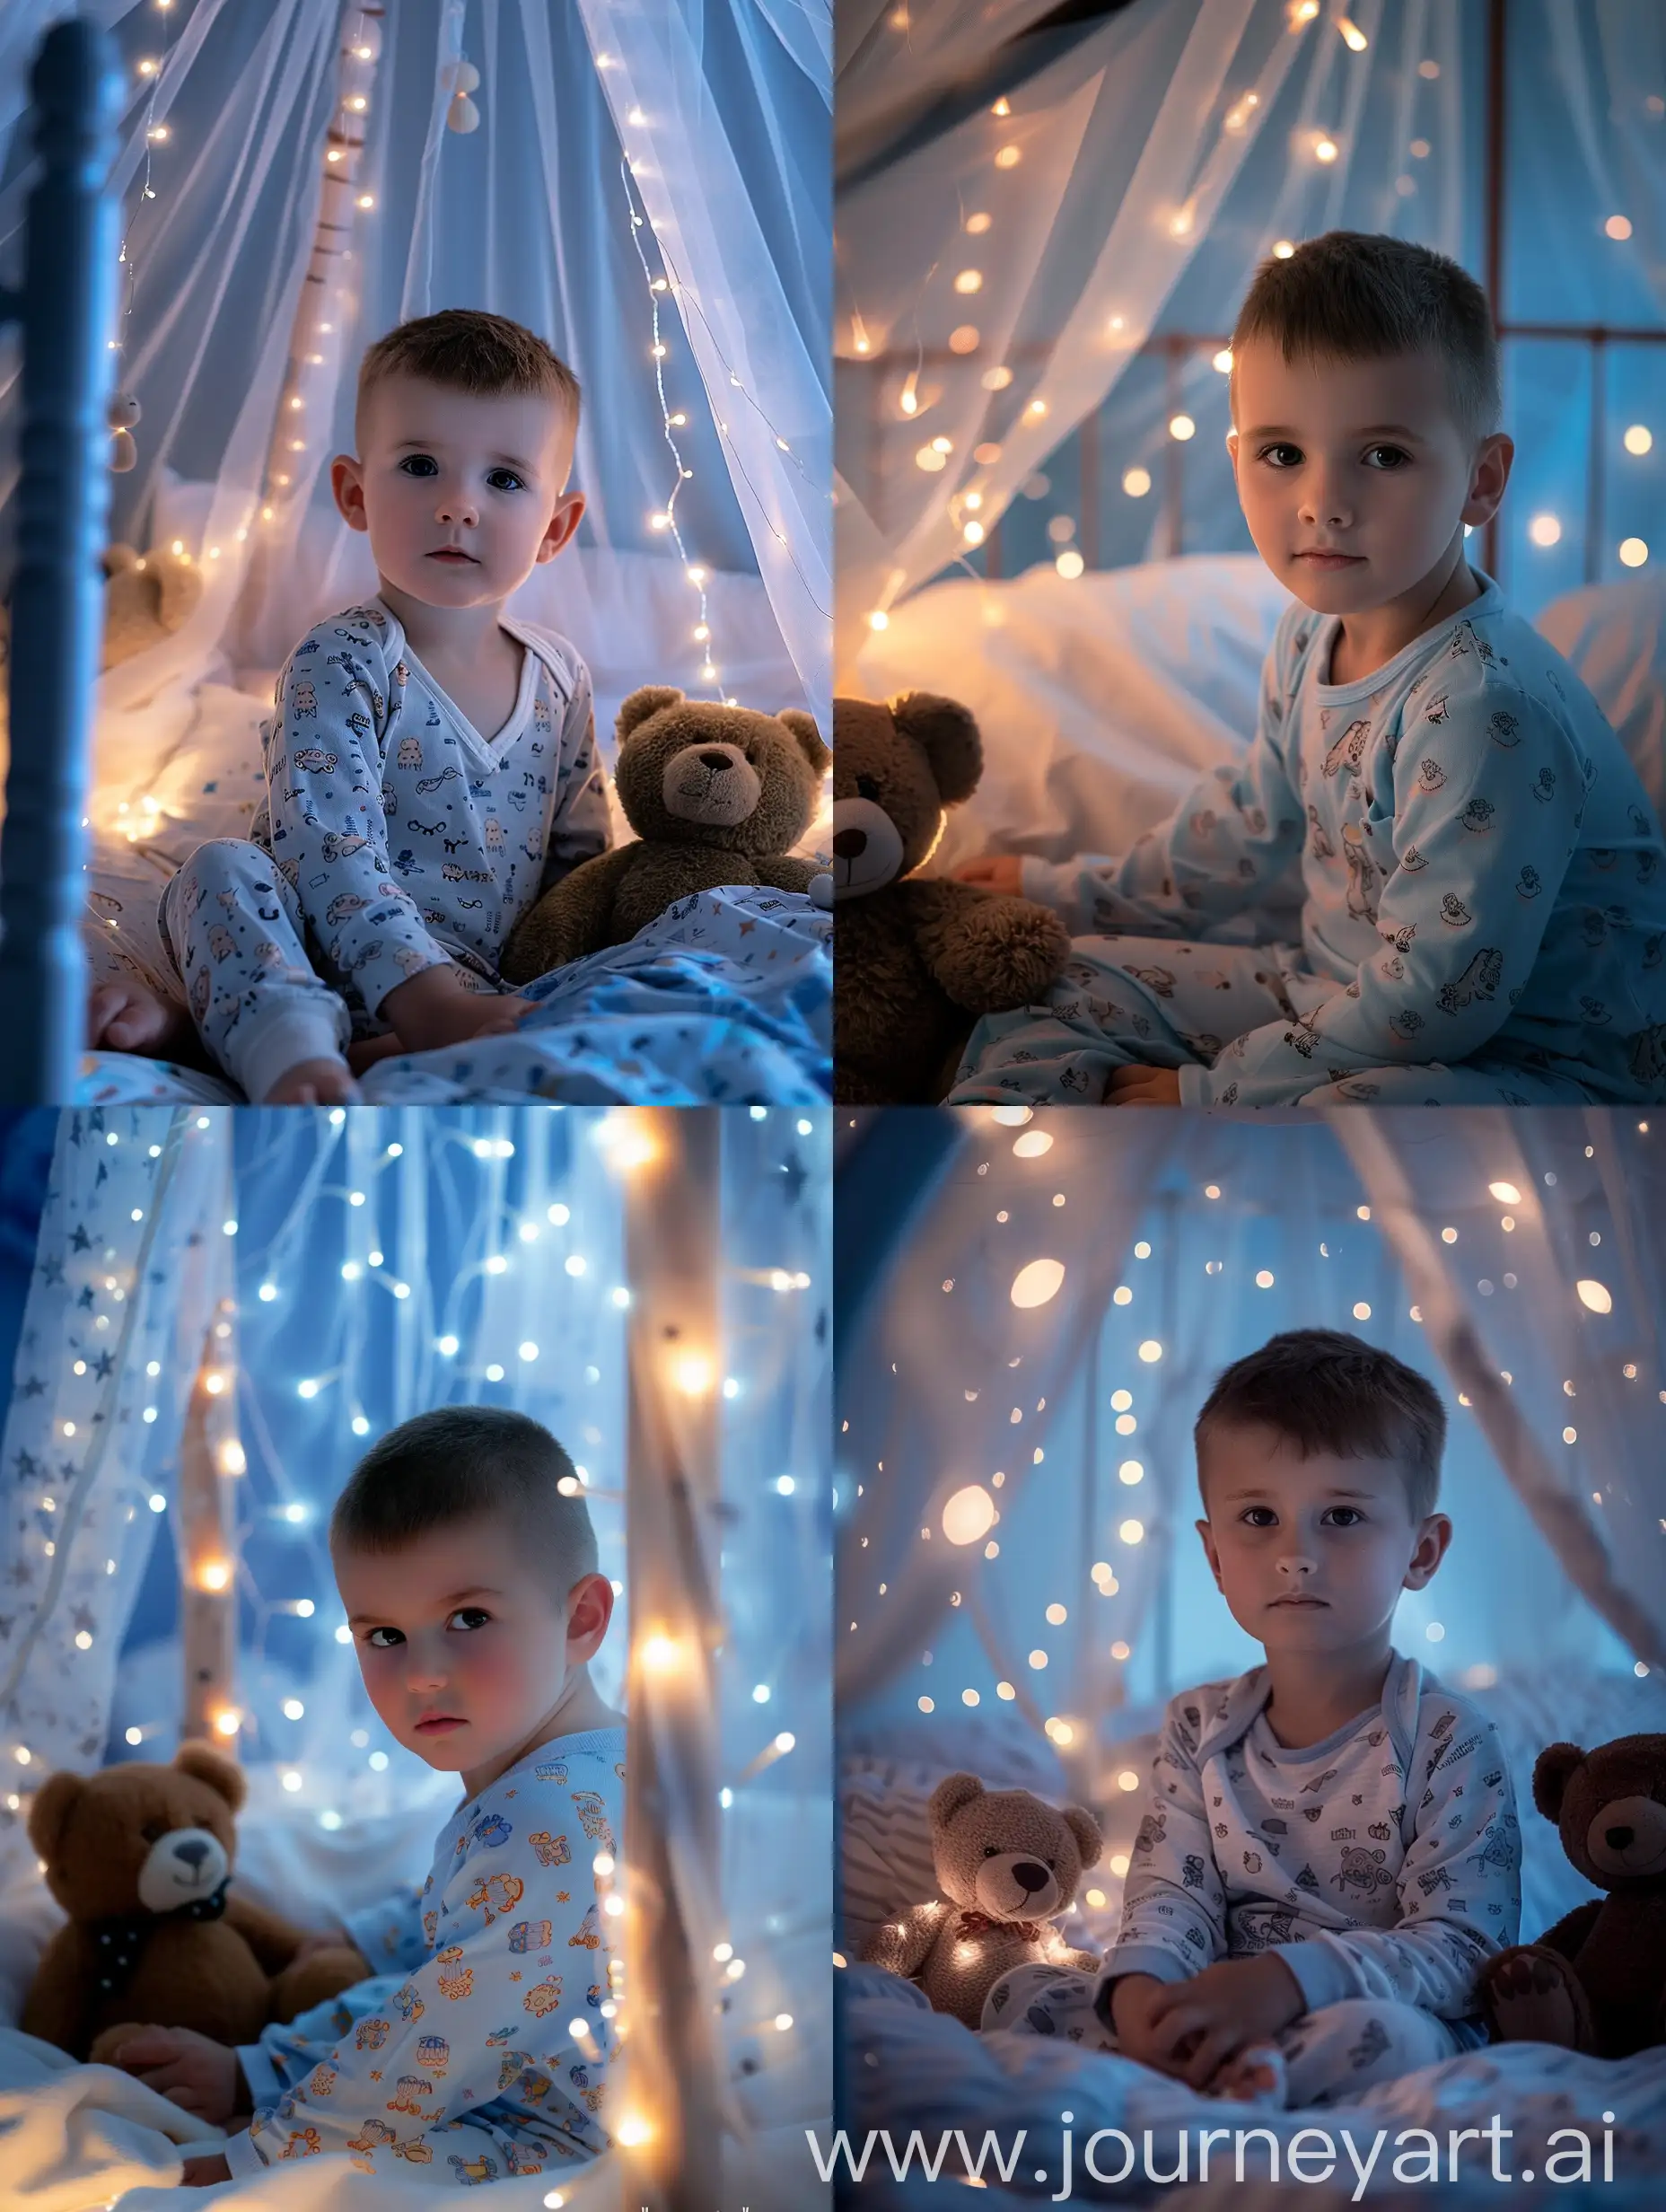 A little boy with short hair in pajamas is sitting on a four-poster bed, the canopy glows with lights, next to a teddy bear, close-up, realistic photo, hyperrealism, face is clearly visible, looking at the camera, photo in blue and white tones, close-up photo, light photo